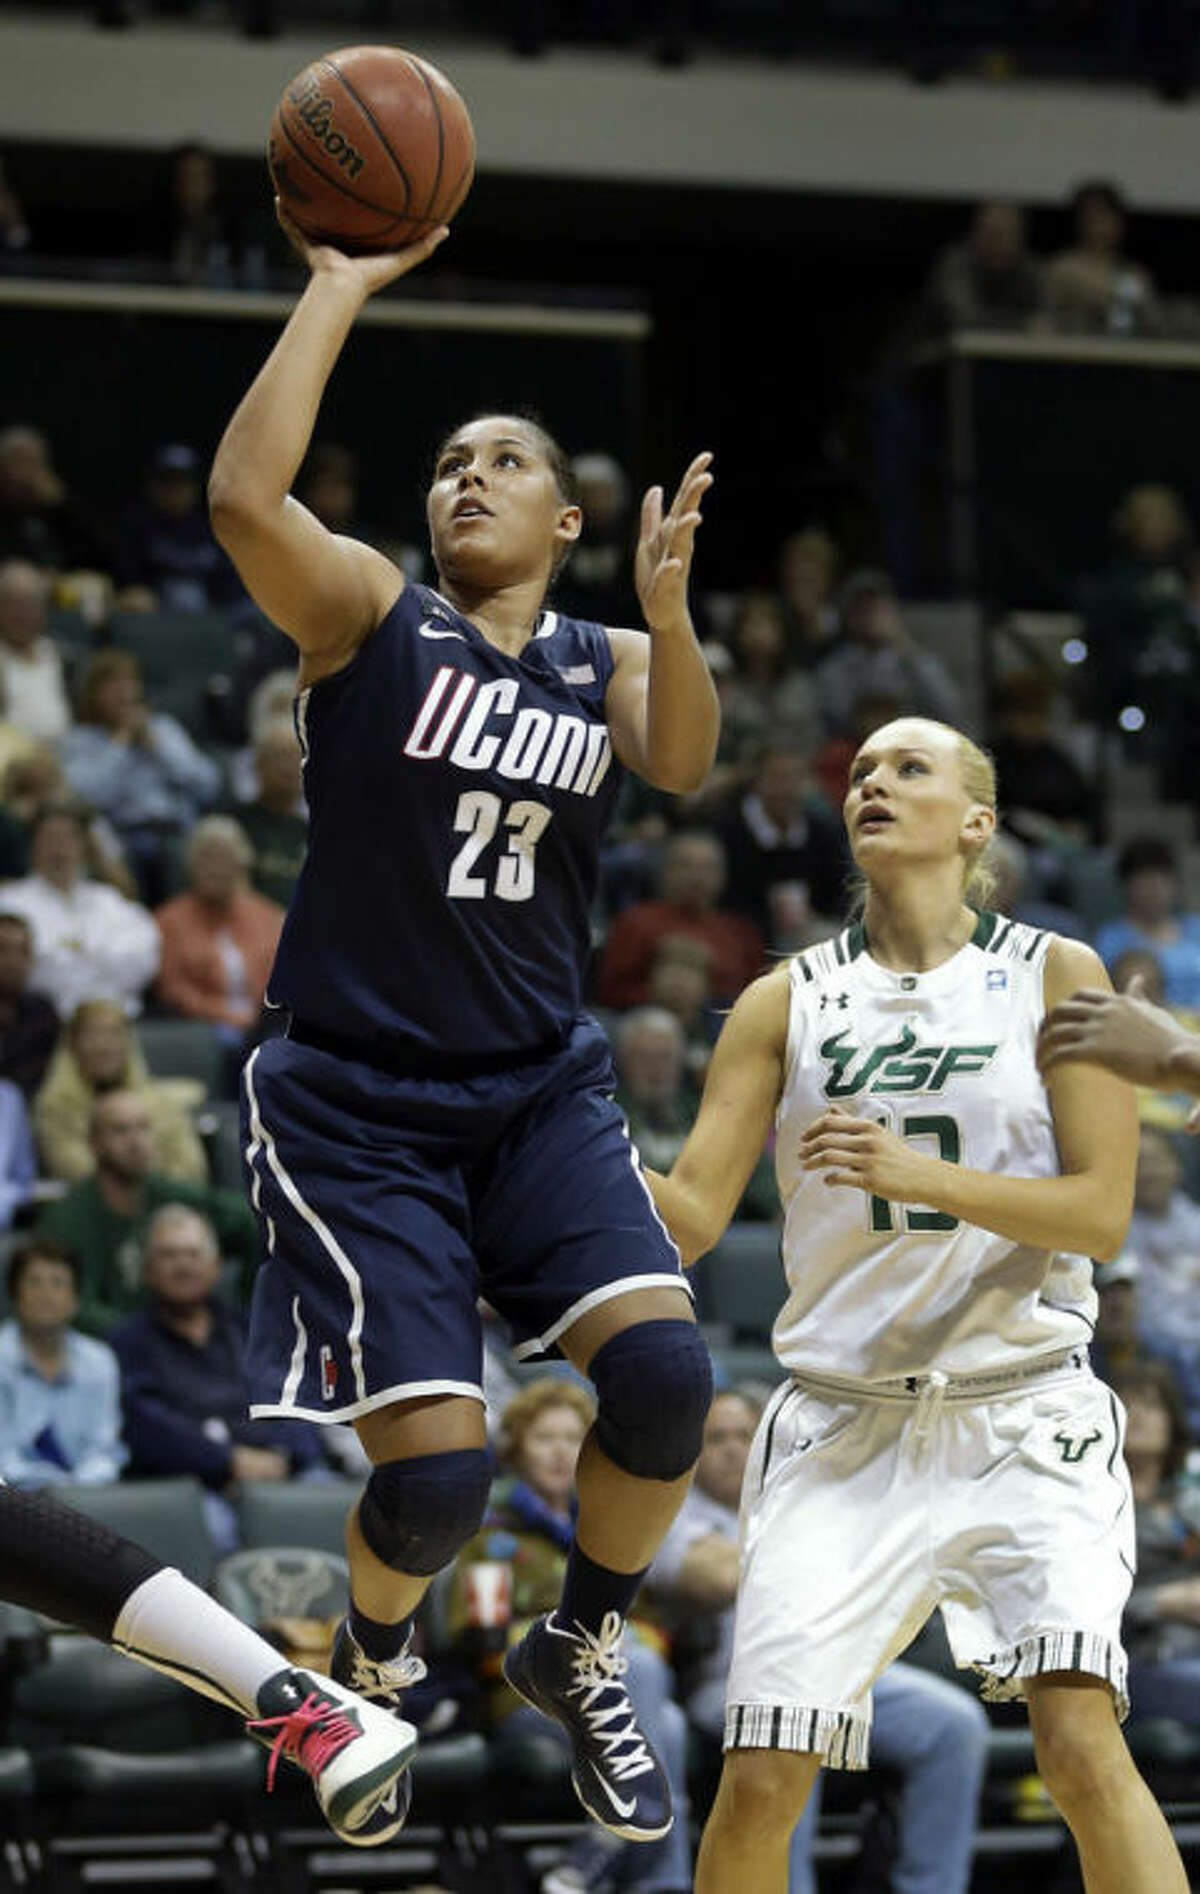 Connecticut forward Kaleena Mosqueda-Lewis (23) shoots past South Florida guard Inga Orekhova (13) during the second half of an NCAA college basketball game Saturday, March 2, 2013, in Tampa, Fla. Mosqueda-Lewis had 32 points in UConn's 85-51 win. (AP Photo/Chris O'Meara)